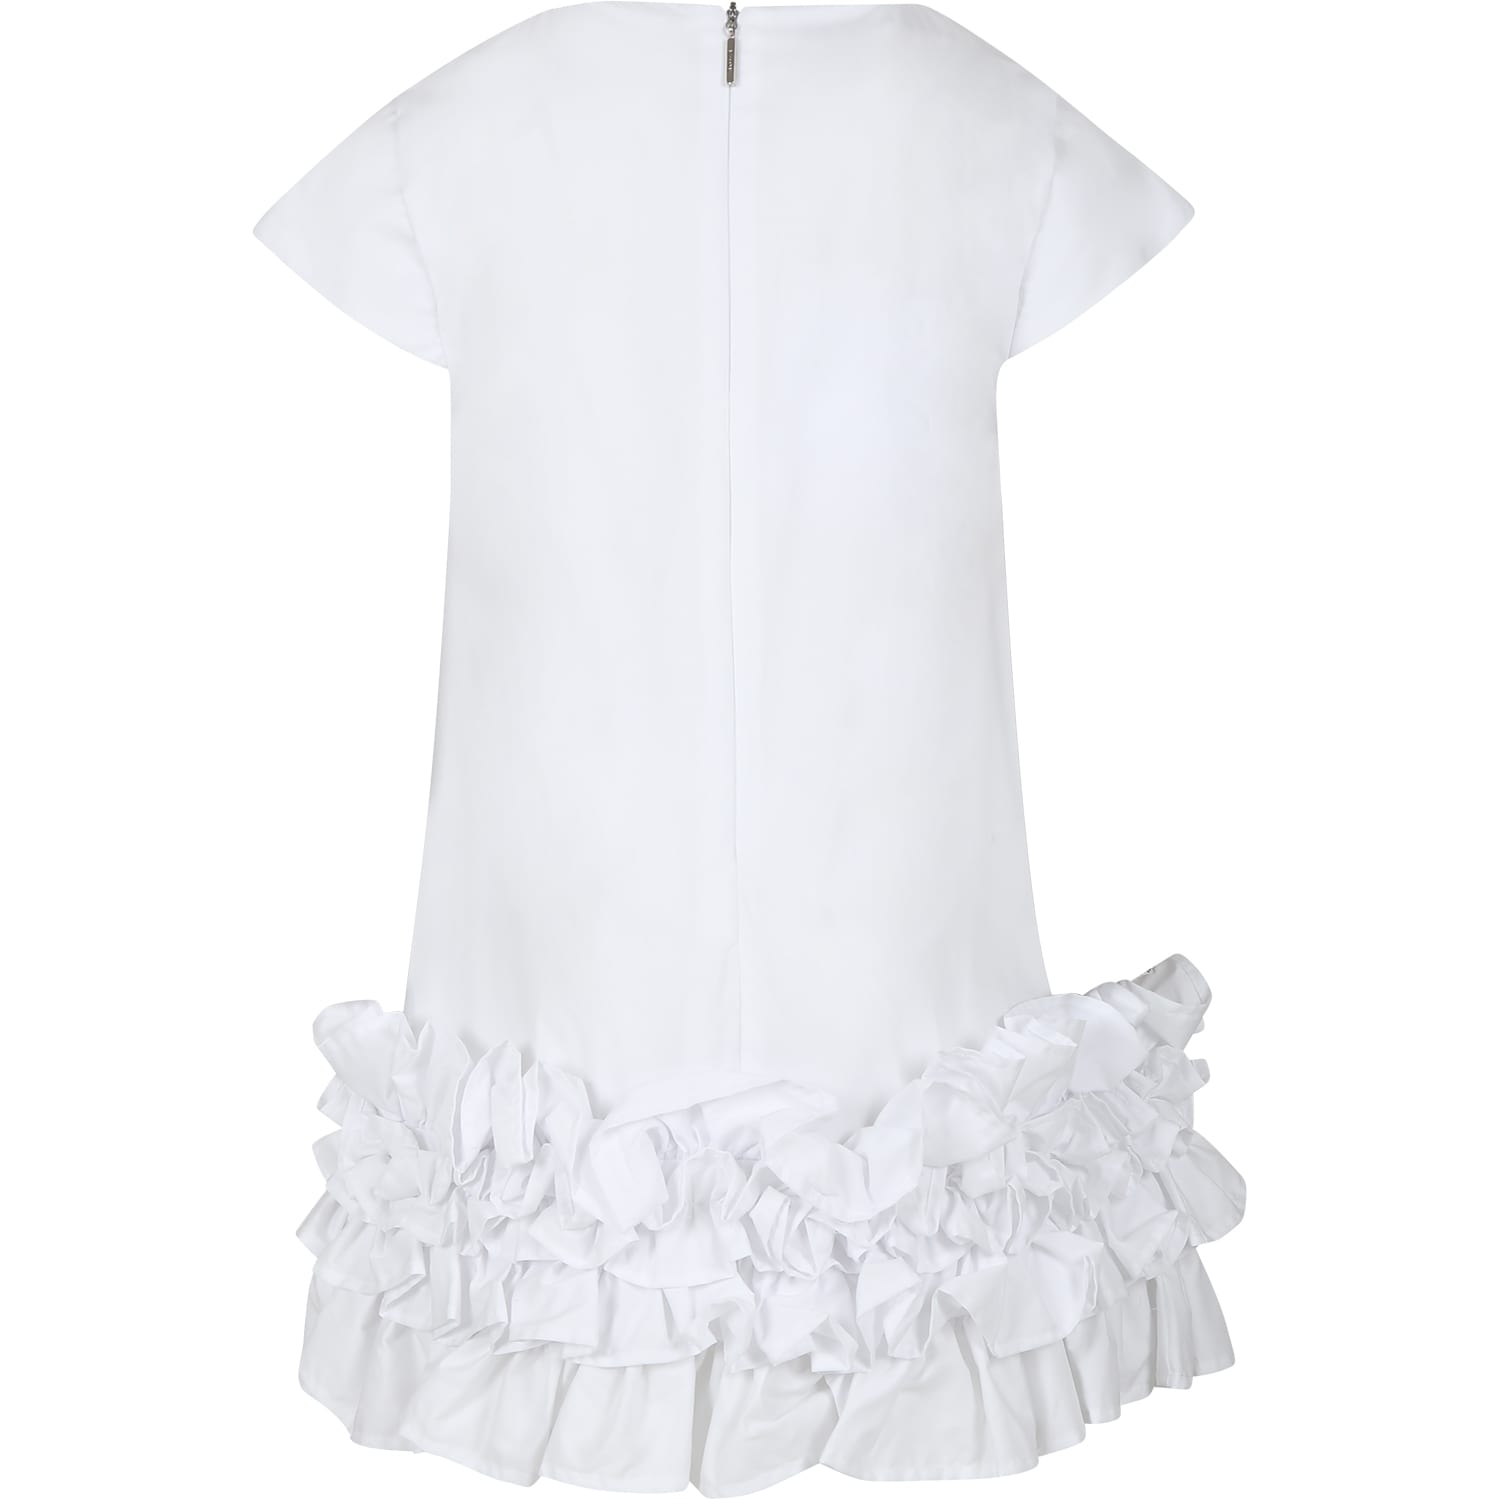 Shop Msgm White Dress For Girl With Logo